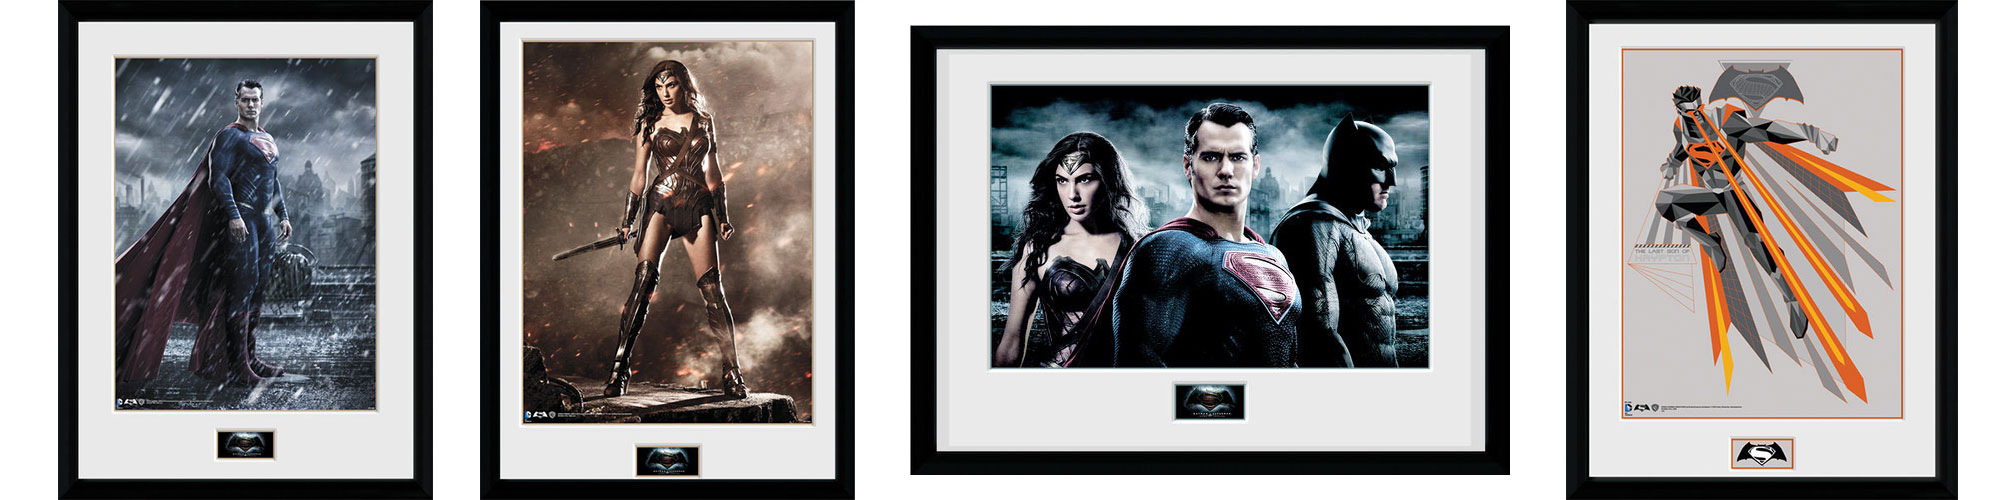 dawn-of-justice-framed-poster-toyslife